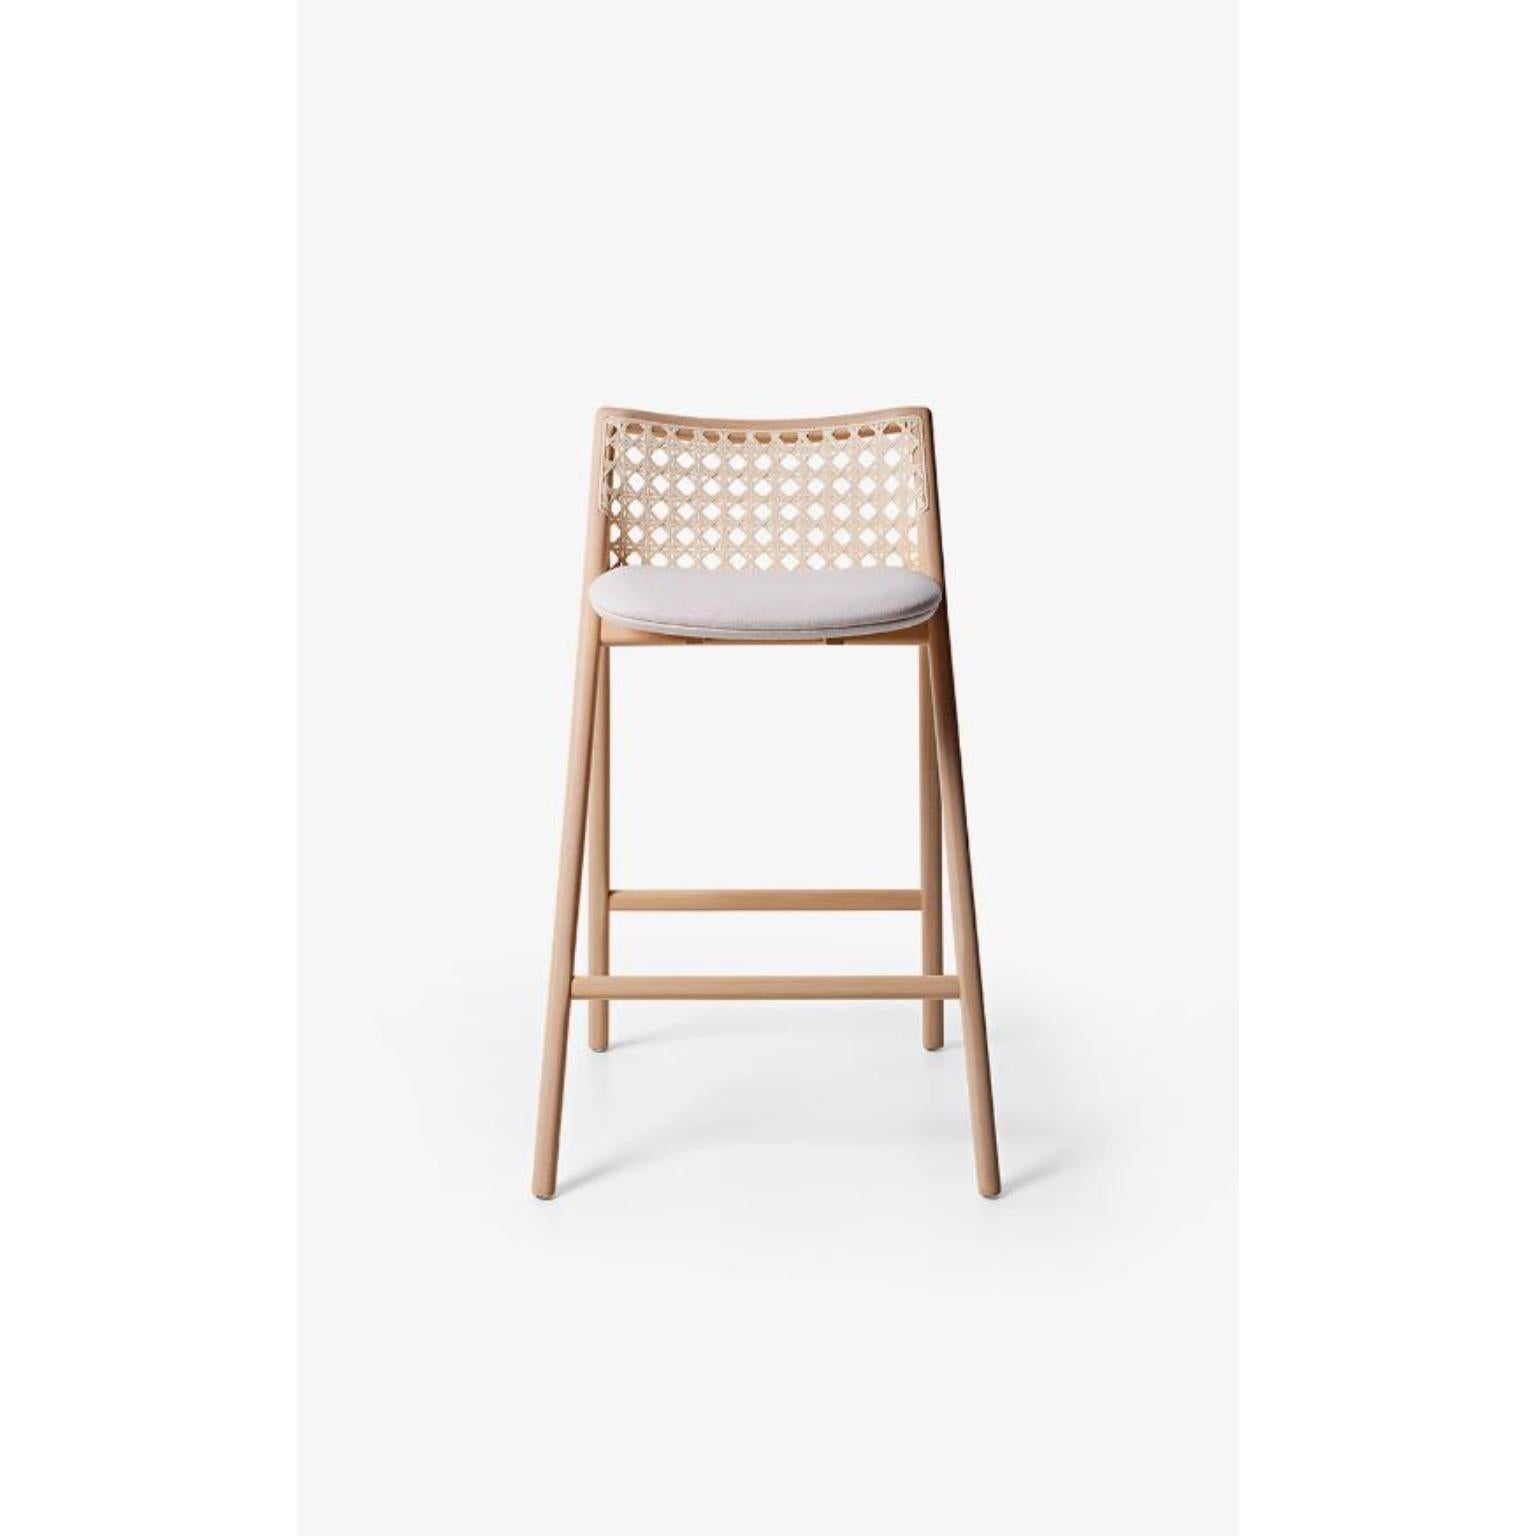 Bleached Tauari Tela Chair by Wentz
Dimensions: D 52 x W 58 x H 84 cm
Materials: Tauari Wood, Cotton, Weave, Plywood, Upholstery.
Weight: 5,8kg / 12,7 lbs

The Tela armchair is a meeting between contemporary design and traditional Brazilian